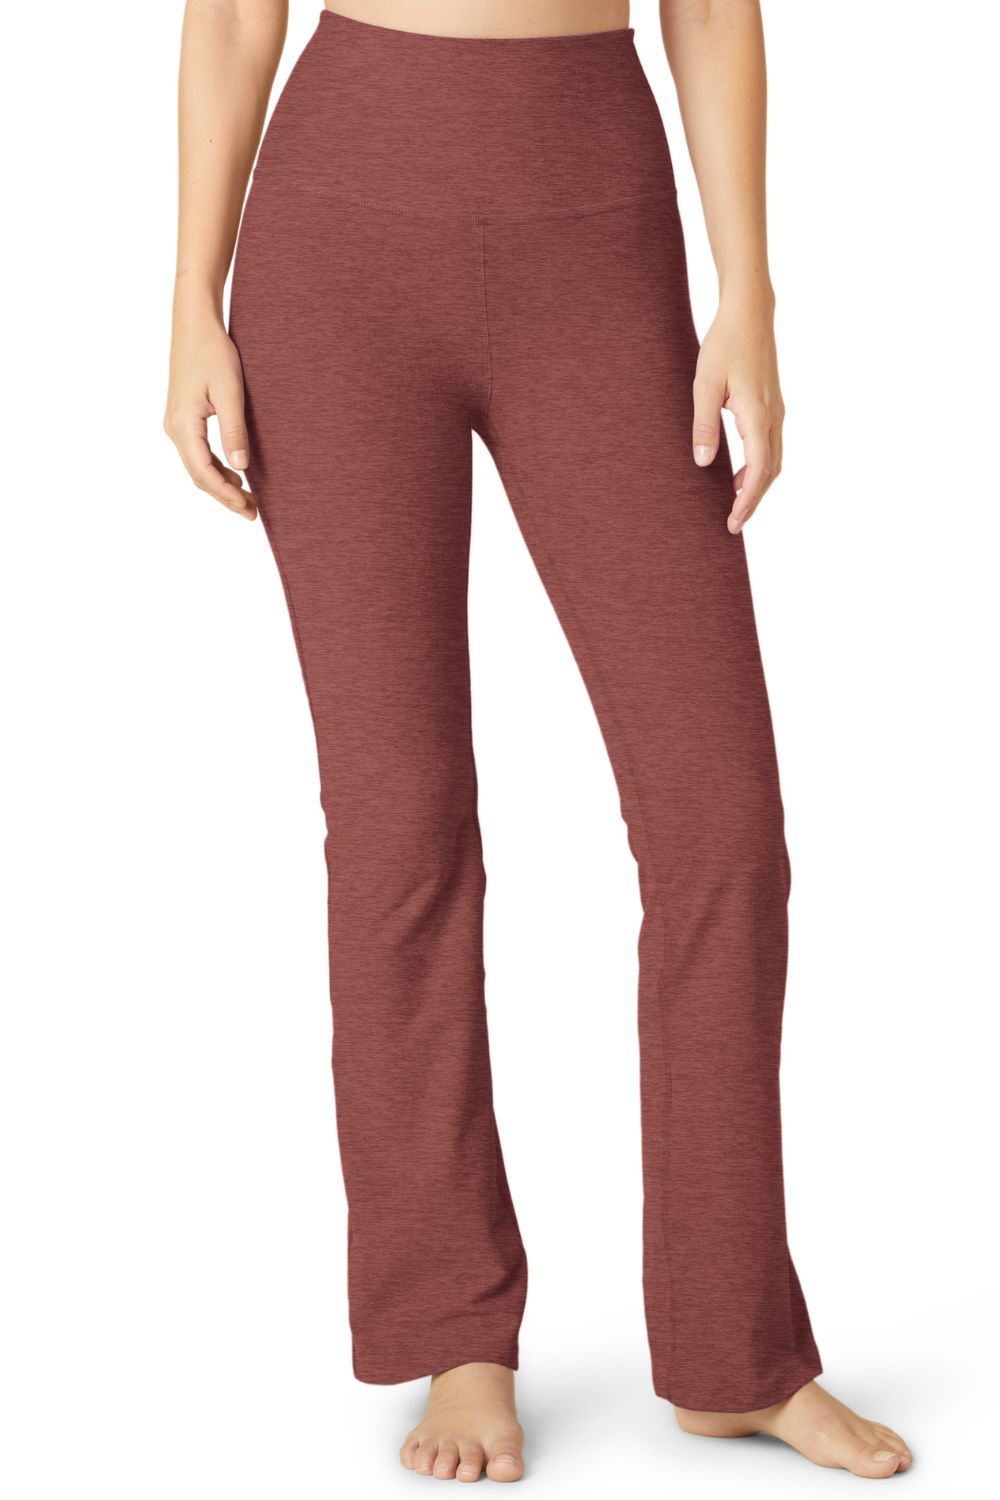 Beyond Yoga High Waisted Practice Pant in Cranberry Heather